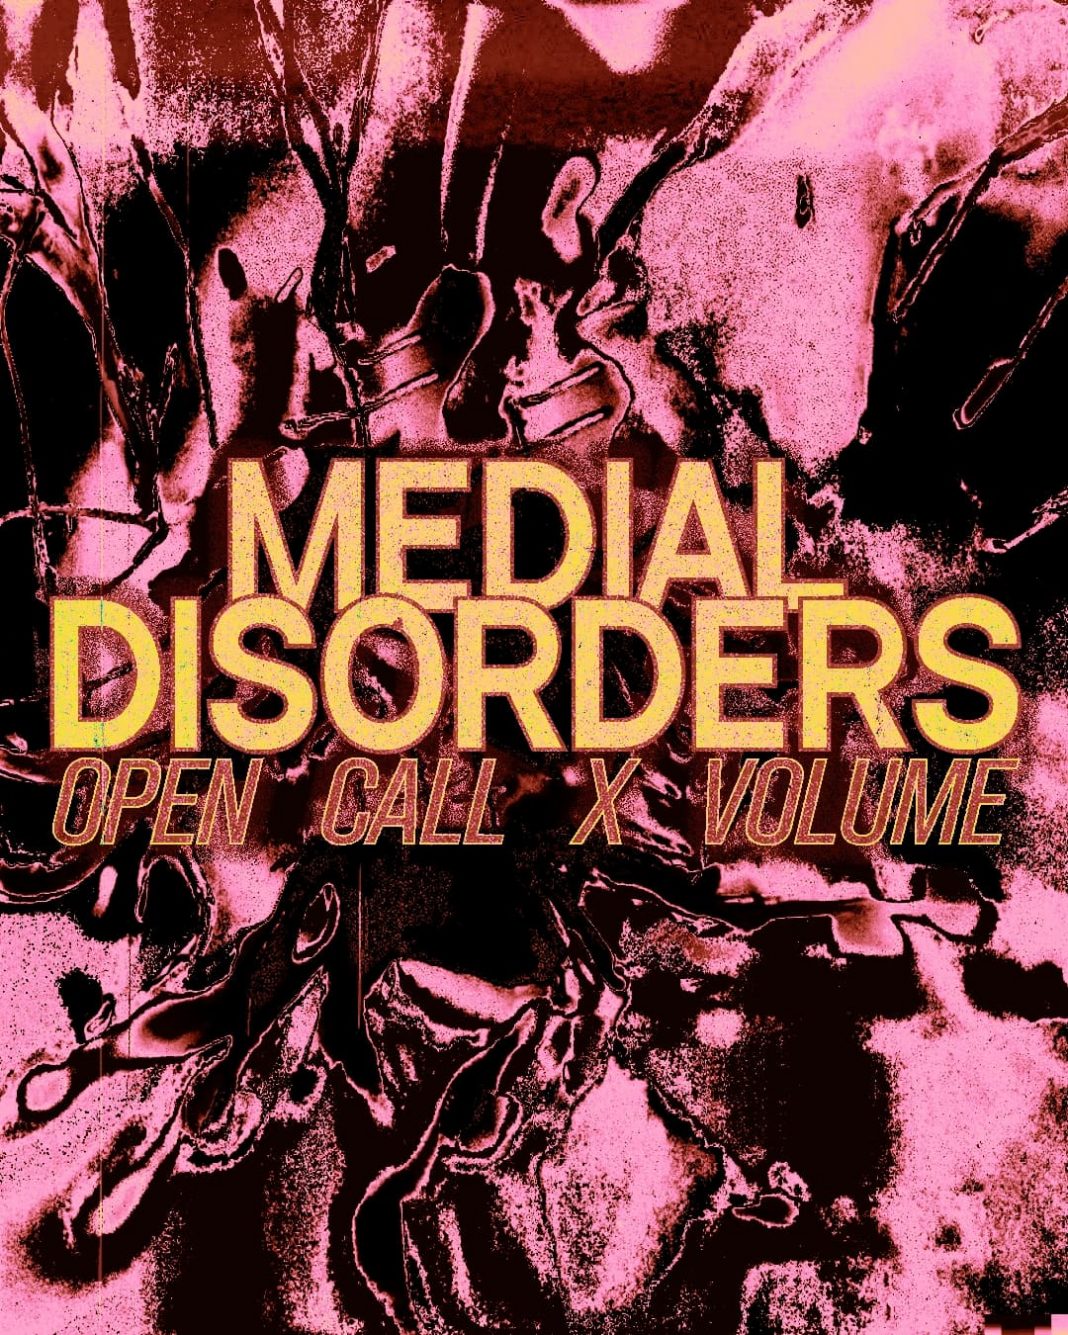 MEDIAL DISORDERS / OPEN CALL PER VOLUME CARTACEOhttps://www.exibart.com/repository/media/formidable/11/img/d91/medial-disorders1-1068x1335.jpg